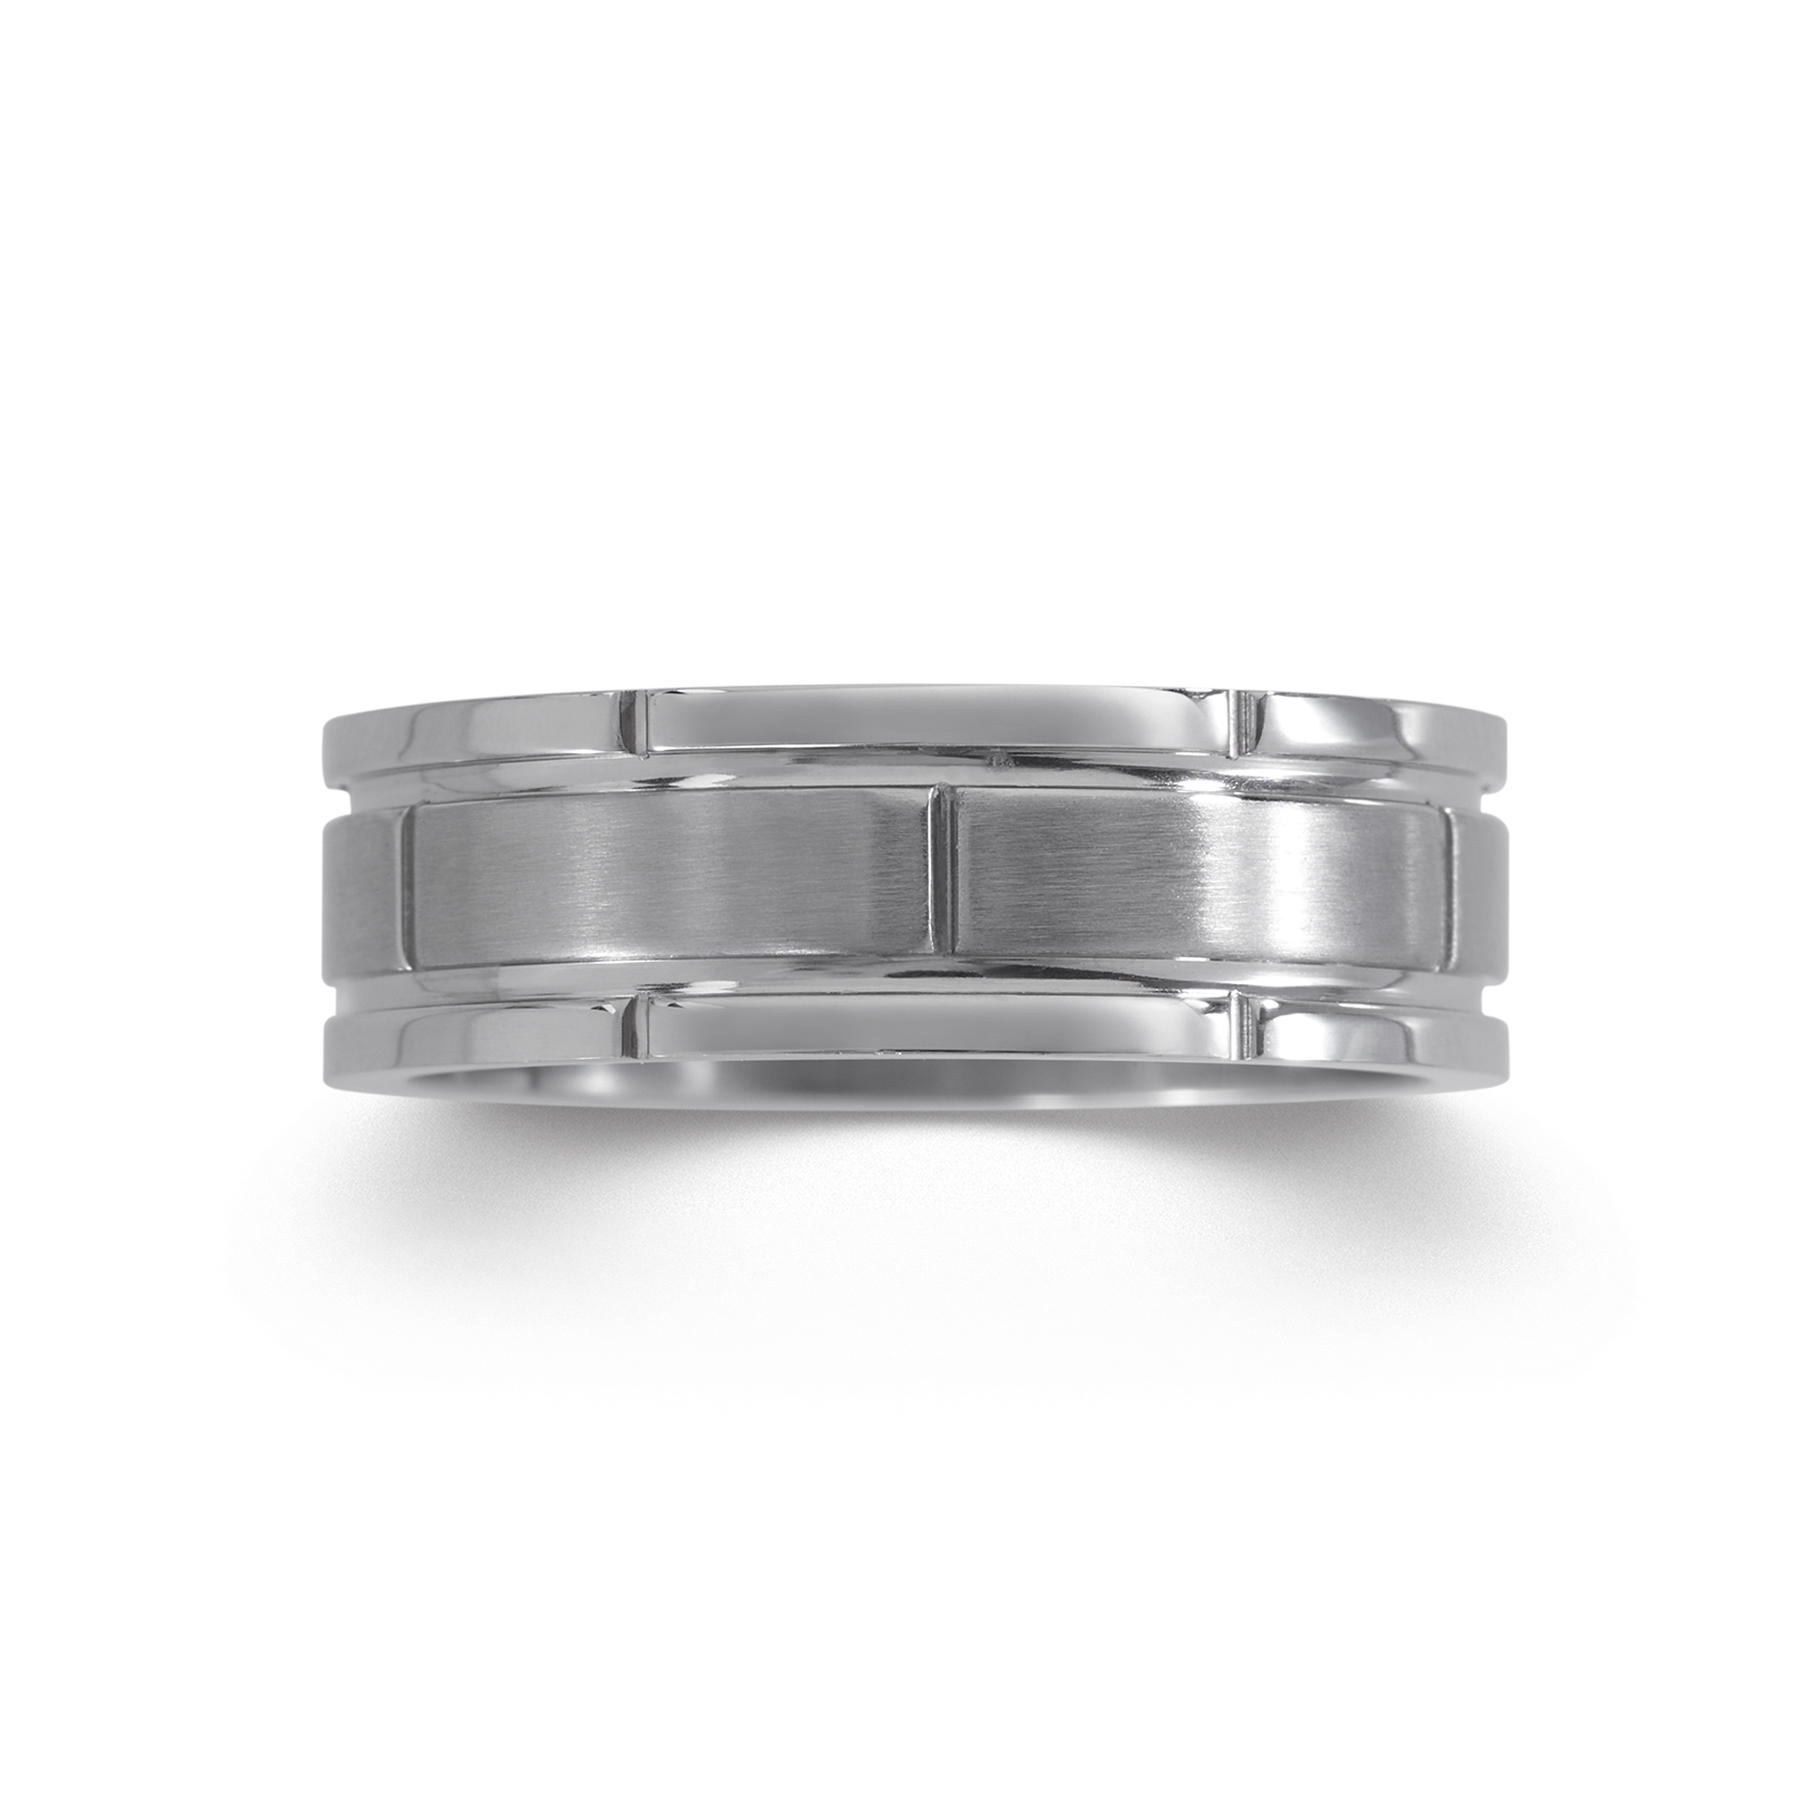 Men's Stainless Steel Wedding Band - Brick Design - Size 10.5 Only